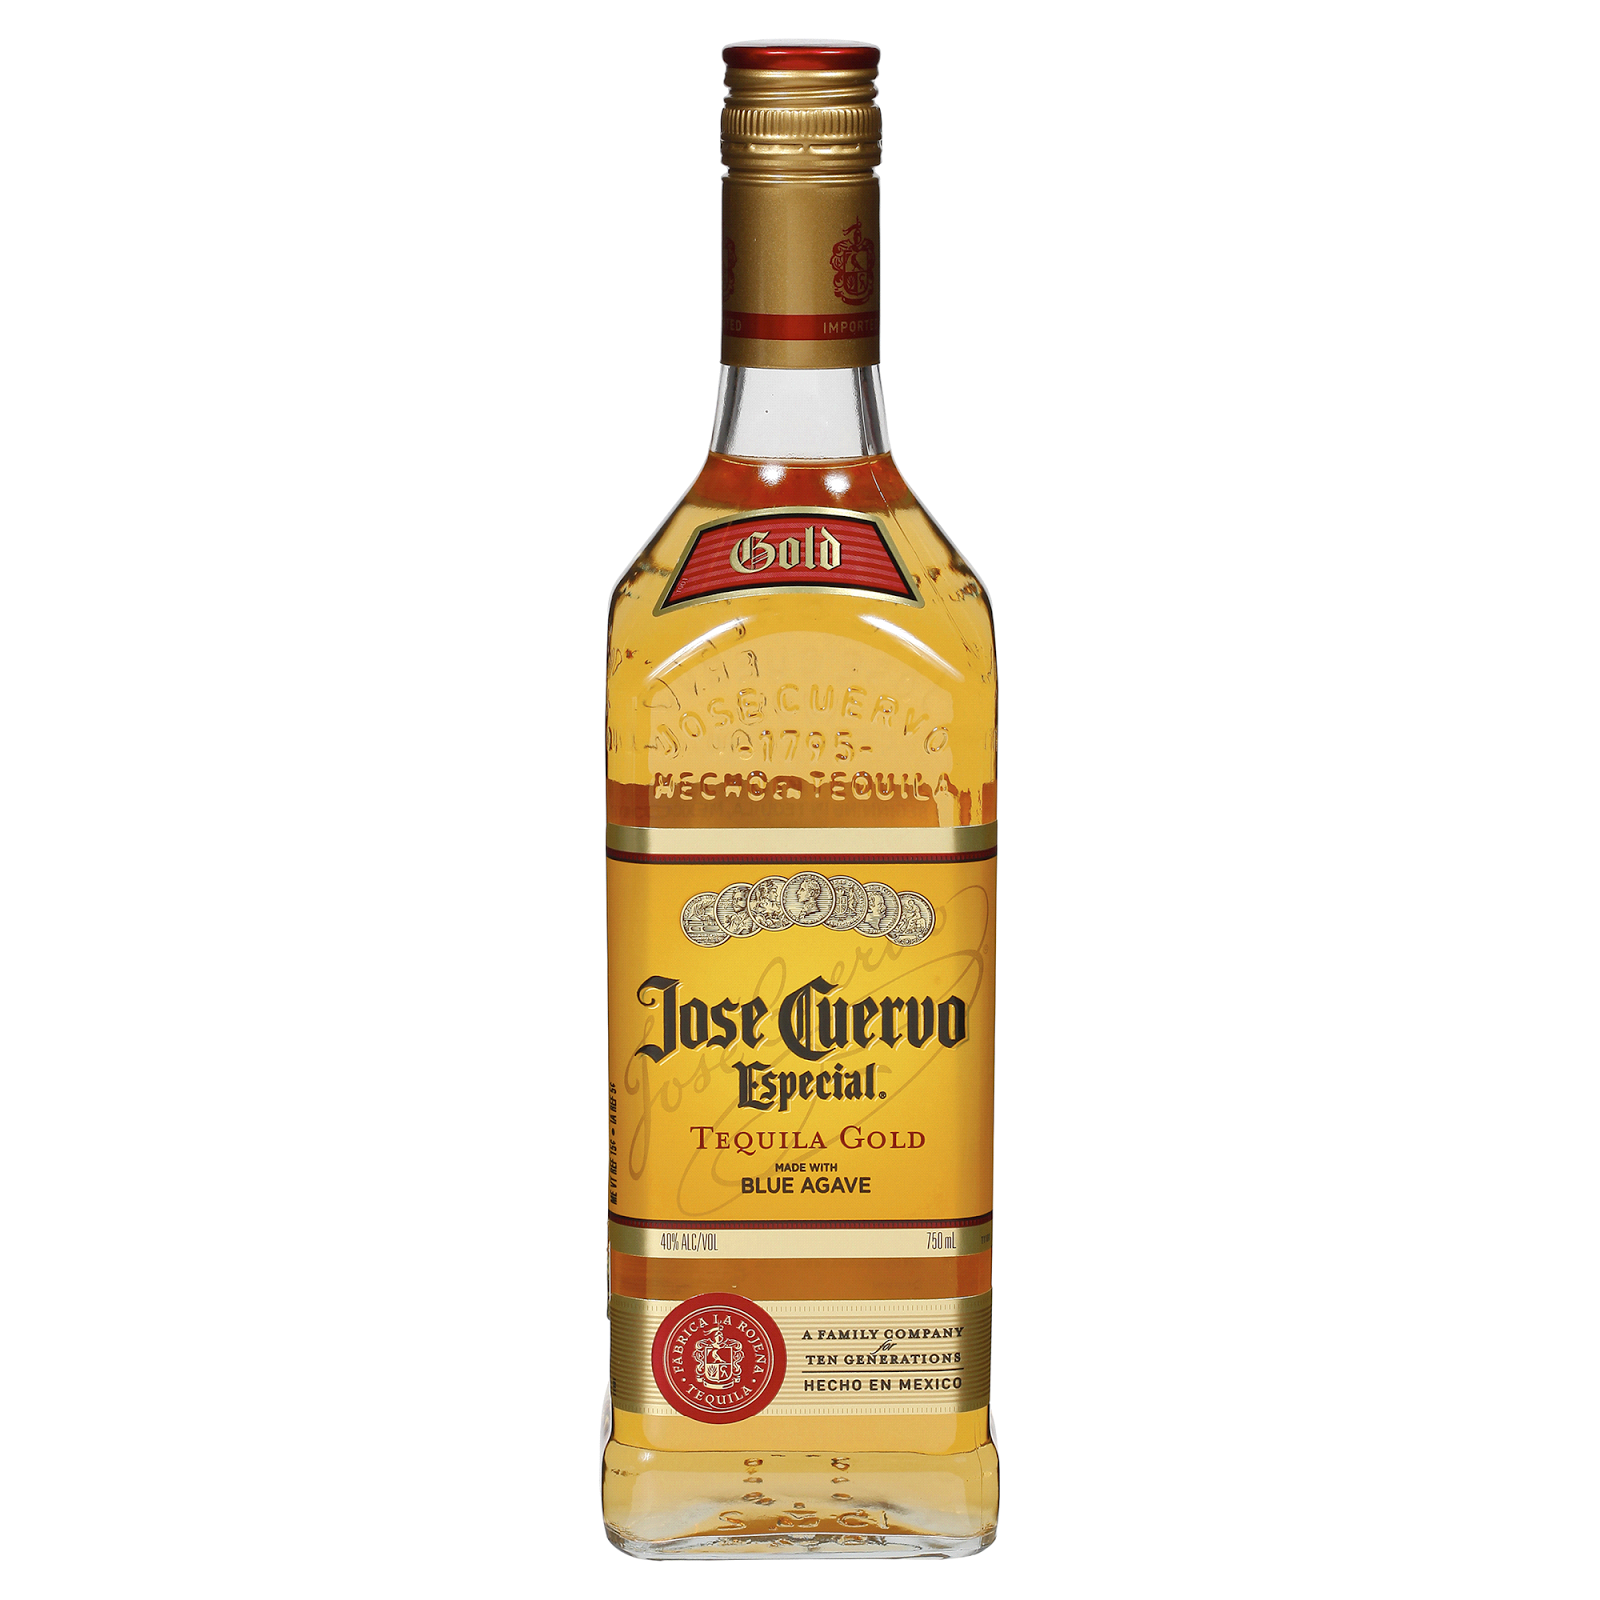 How Much Is A Bottle Of Jose Cuervo